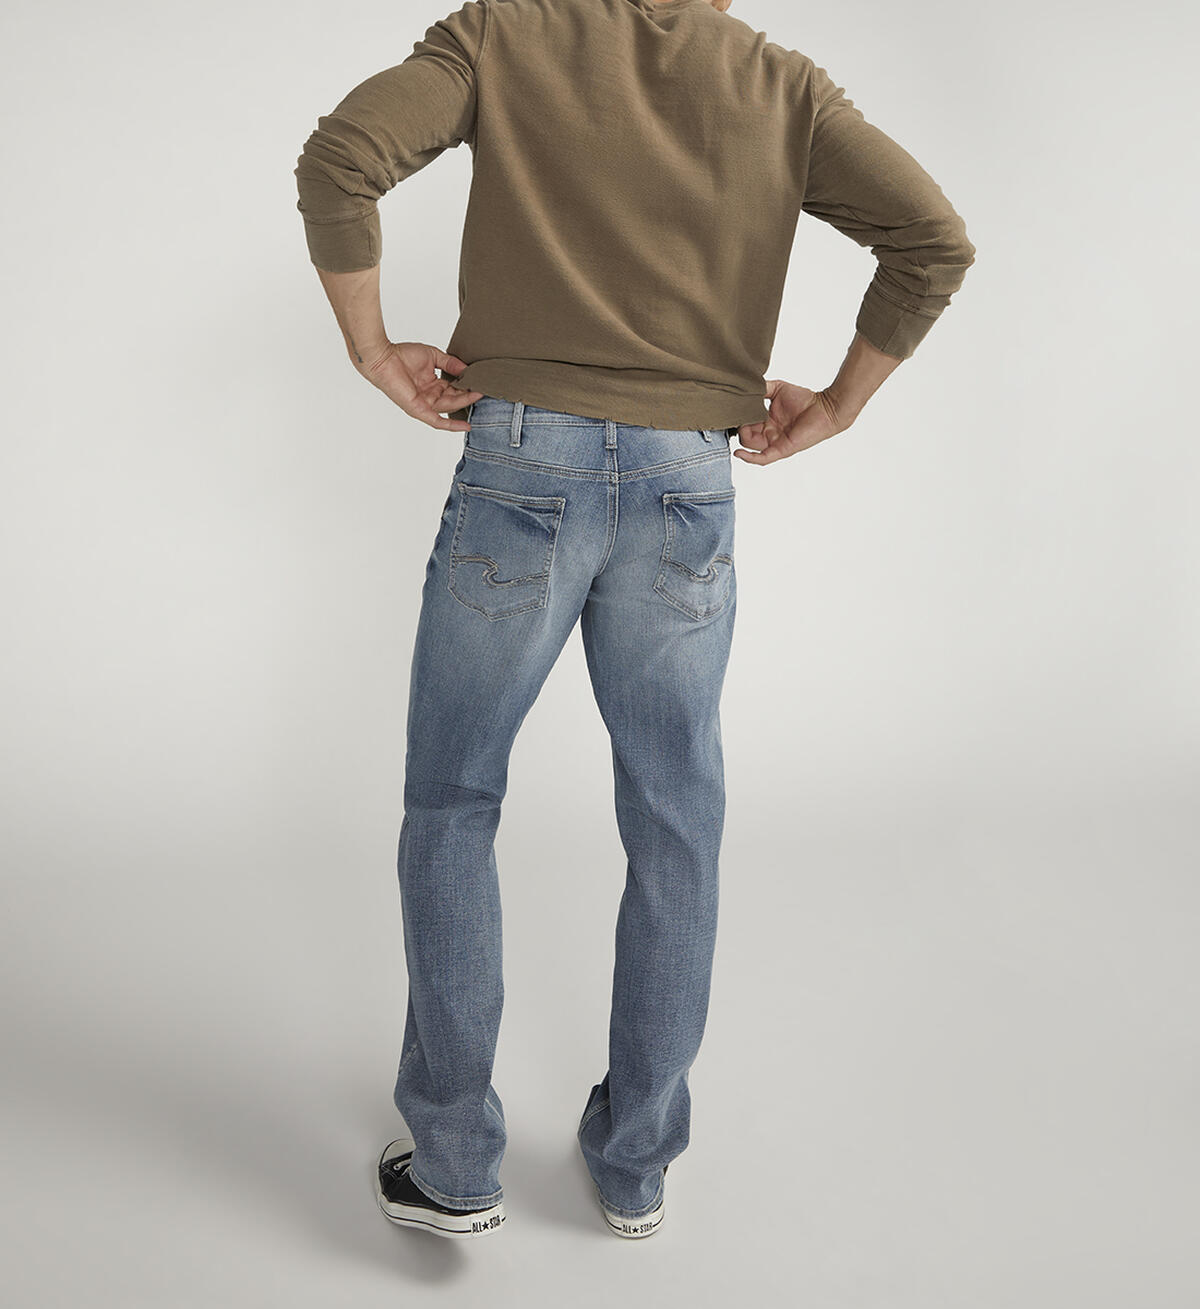 Grayson Classic Fit Straight Leg Jeans, , hi-res image number 1